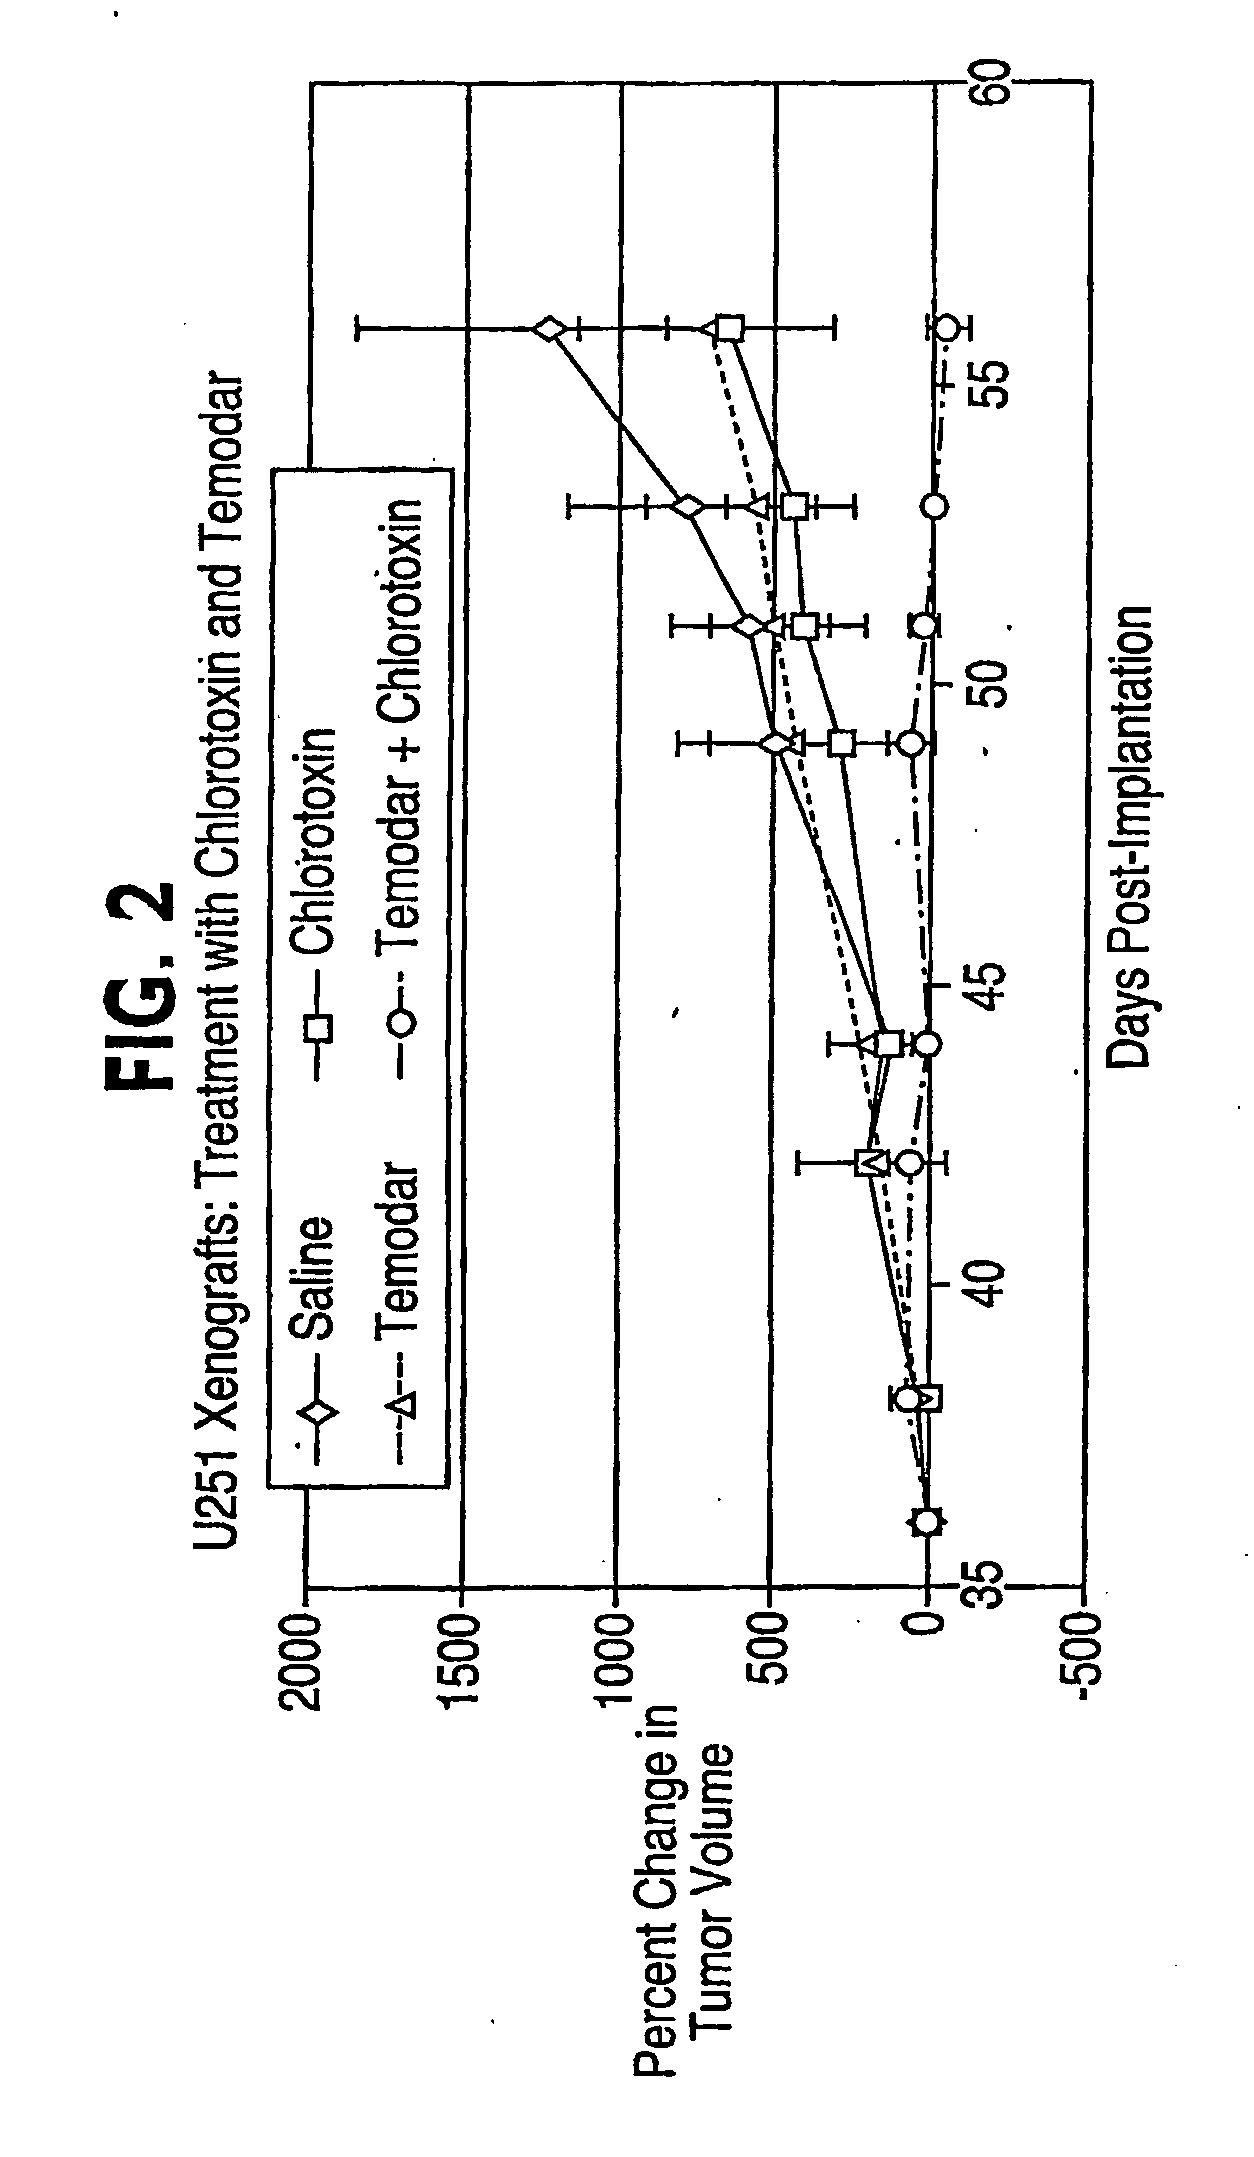 Combination chemotherapy with chlorotoxin